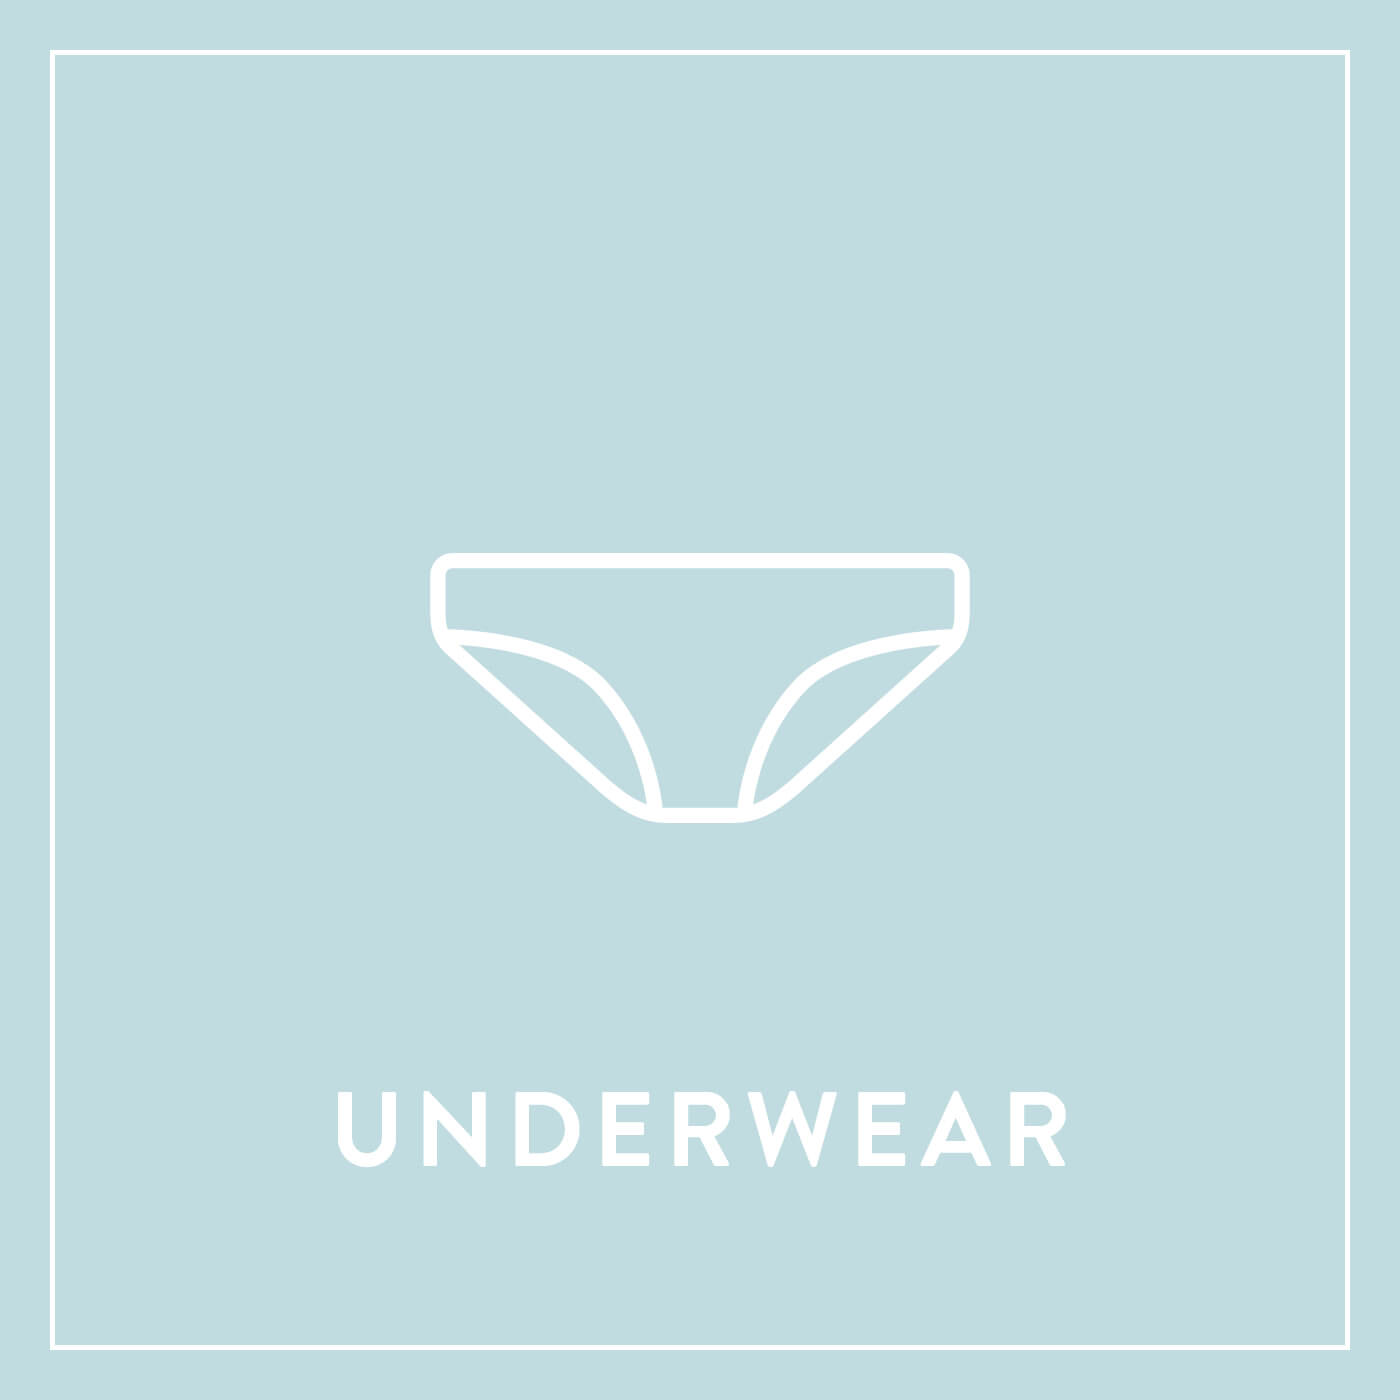 SOEN Lingerie on X: Learn how you can determine the perfect underwear fit  for you to stay comfy all day with our handy guide:    / X